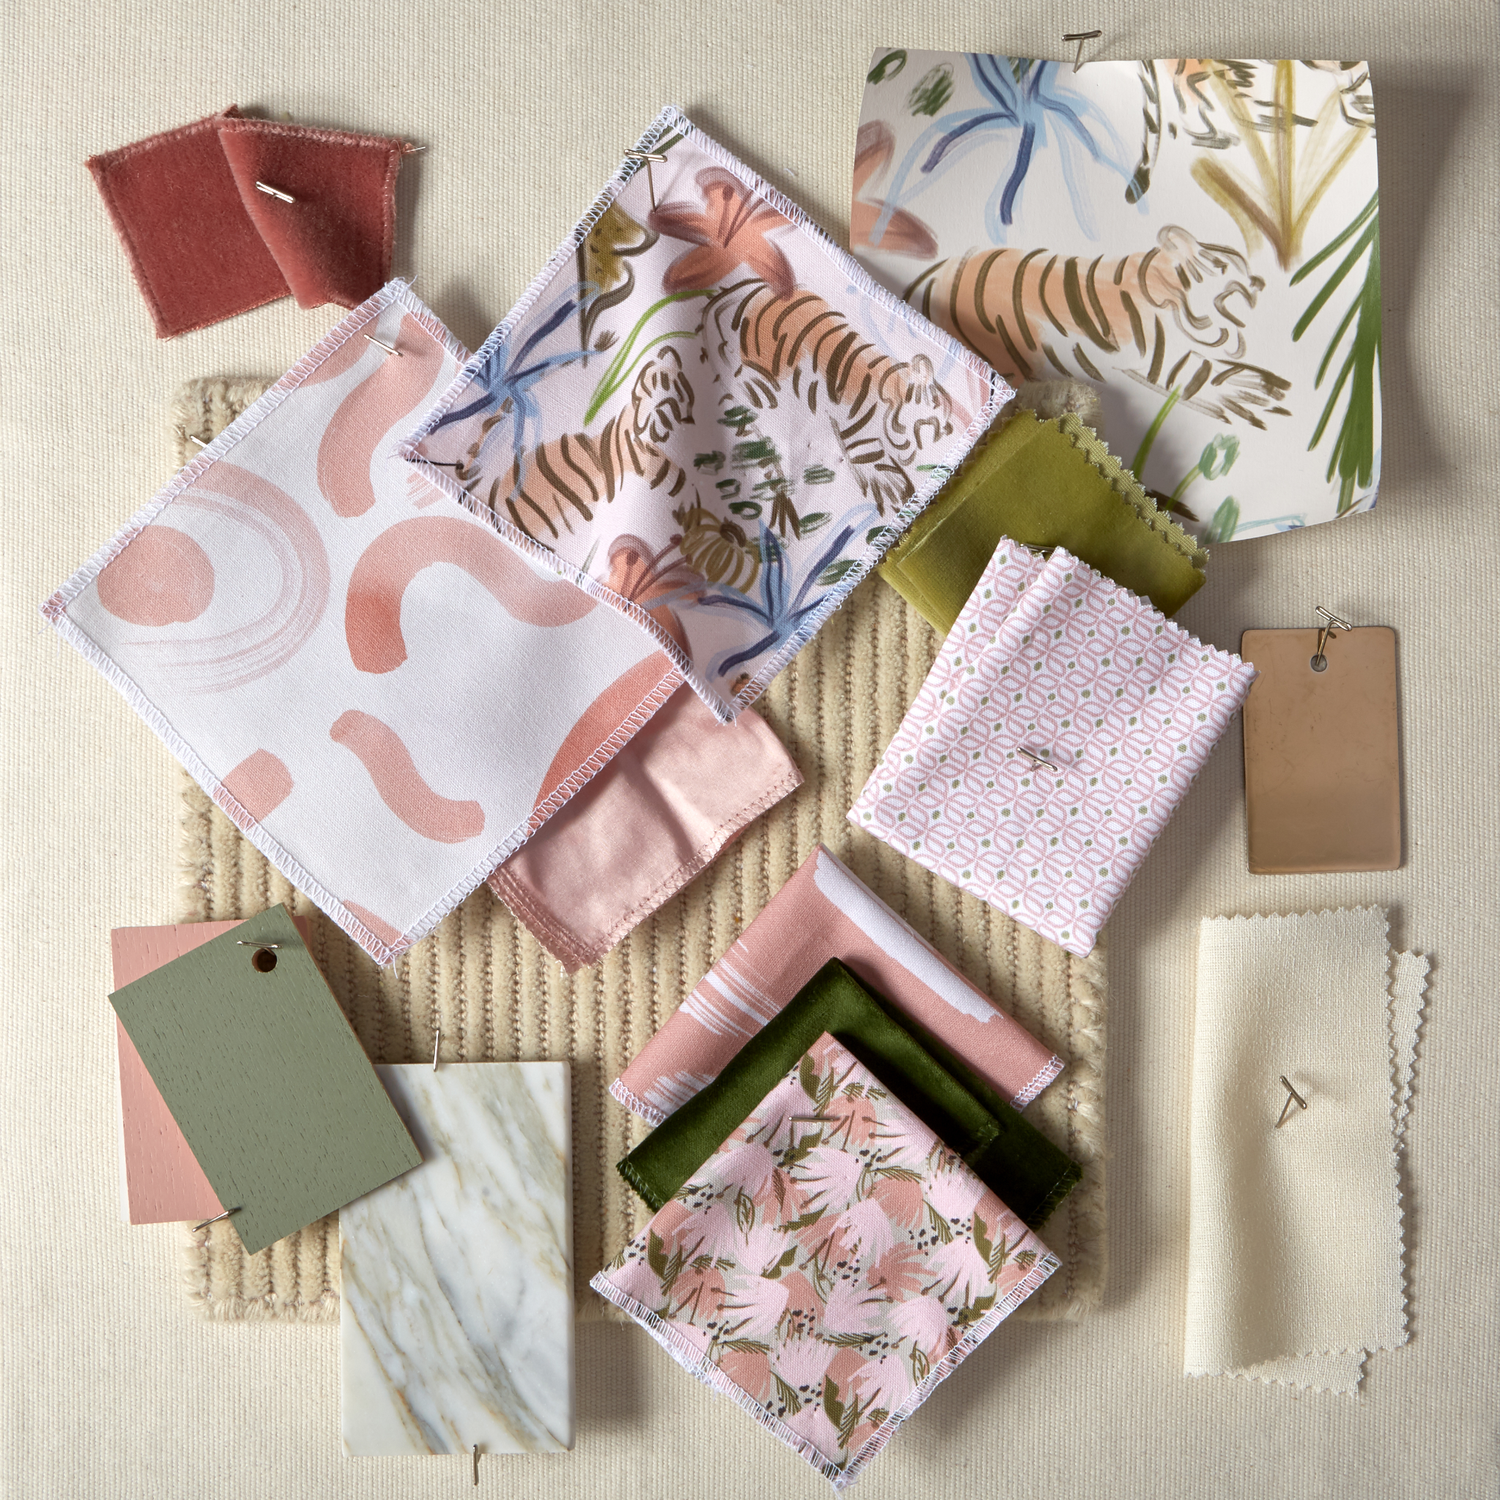 Interior design moodboard and fabric inspirations with Coral Velvet swatch, Pink Chinoiserie Tiger printed cotton swatch, Pink Graphic printed cotton swatch, and Pink Floral printed cotton swatch